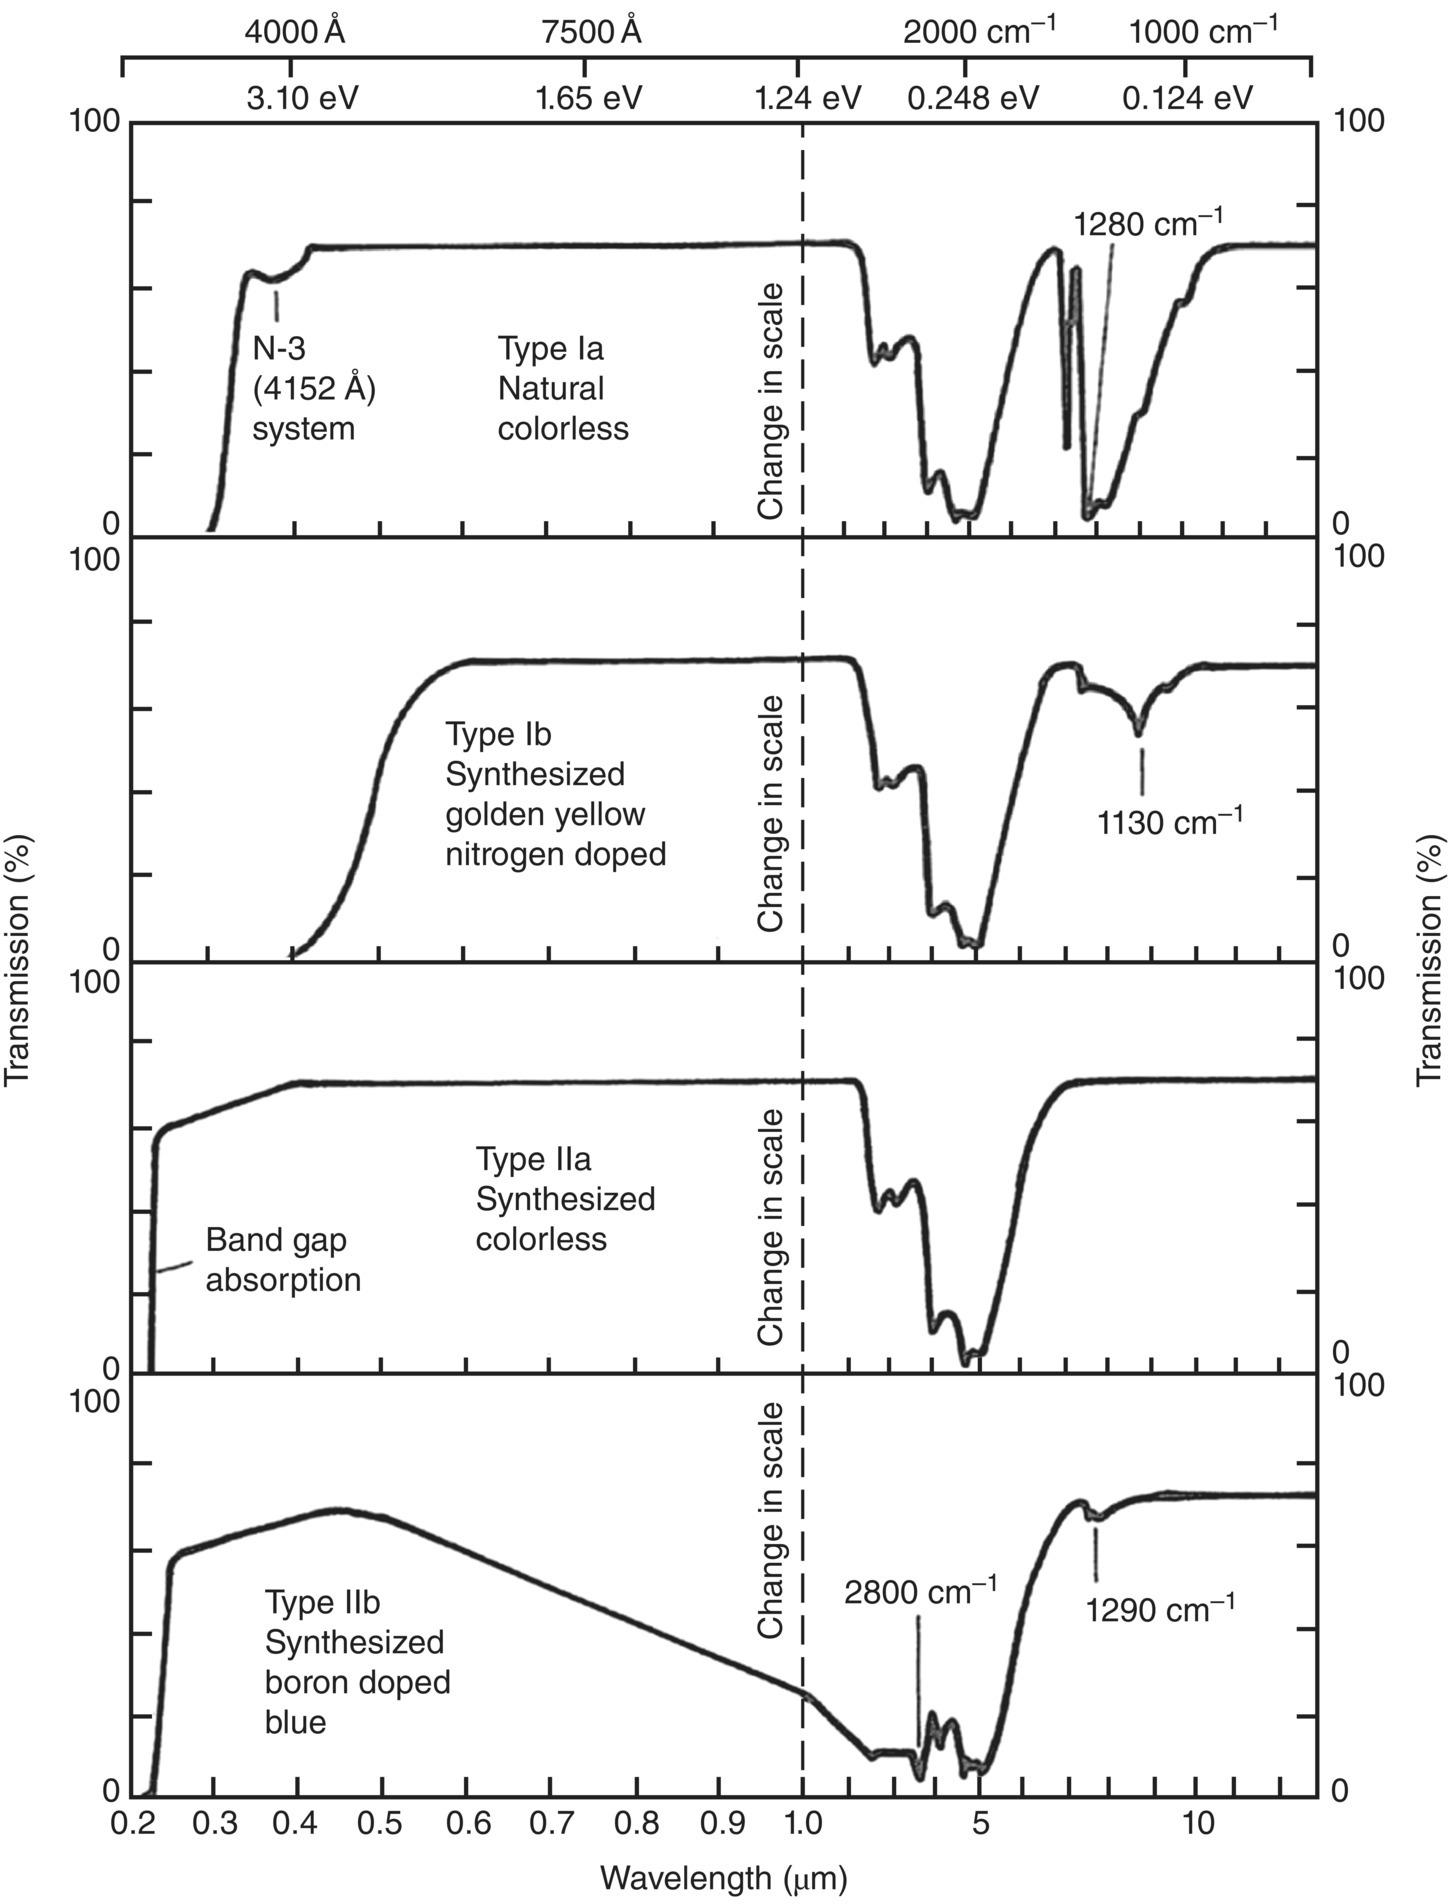 Graph displaying transmission spectra of natural and synthetic diamonds of various types (Ia, Ib, IIa, and IIb), from top to bottom, with 1280 cm–1, 1130 cm–1, band gap absorption, 1290 cm–1, and 2800 cm–1 marked.